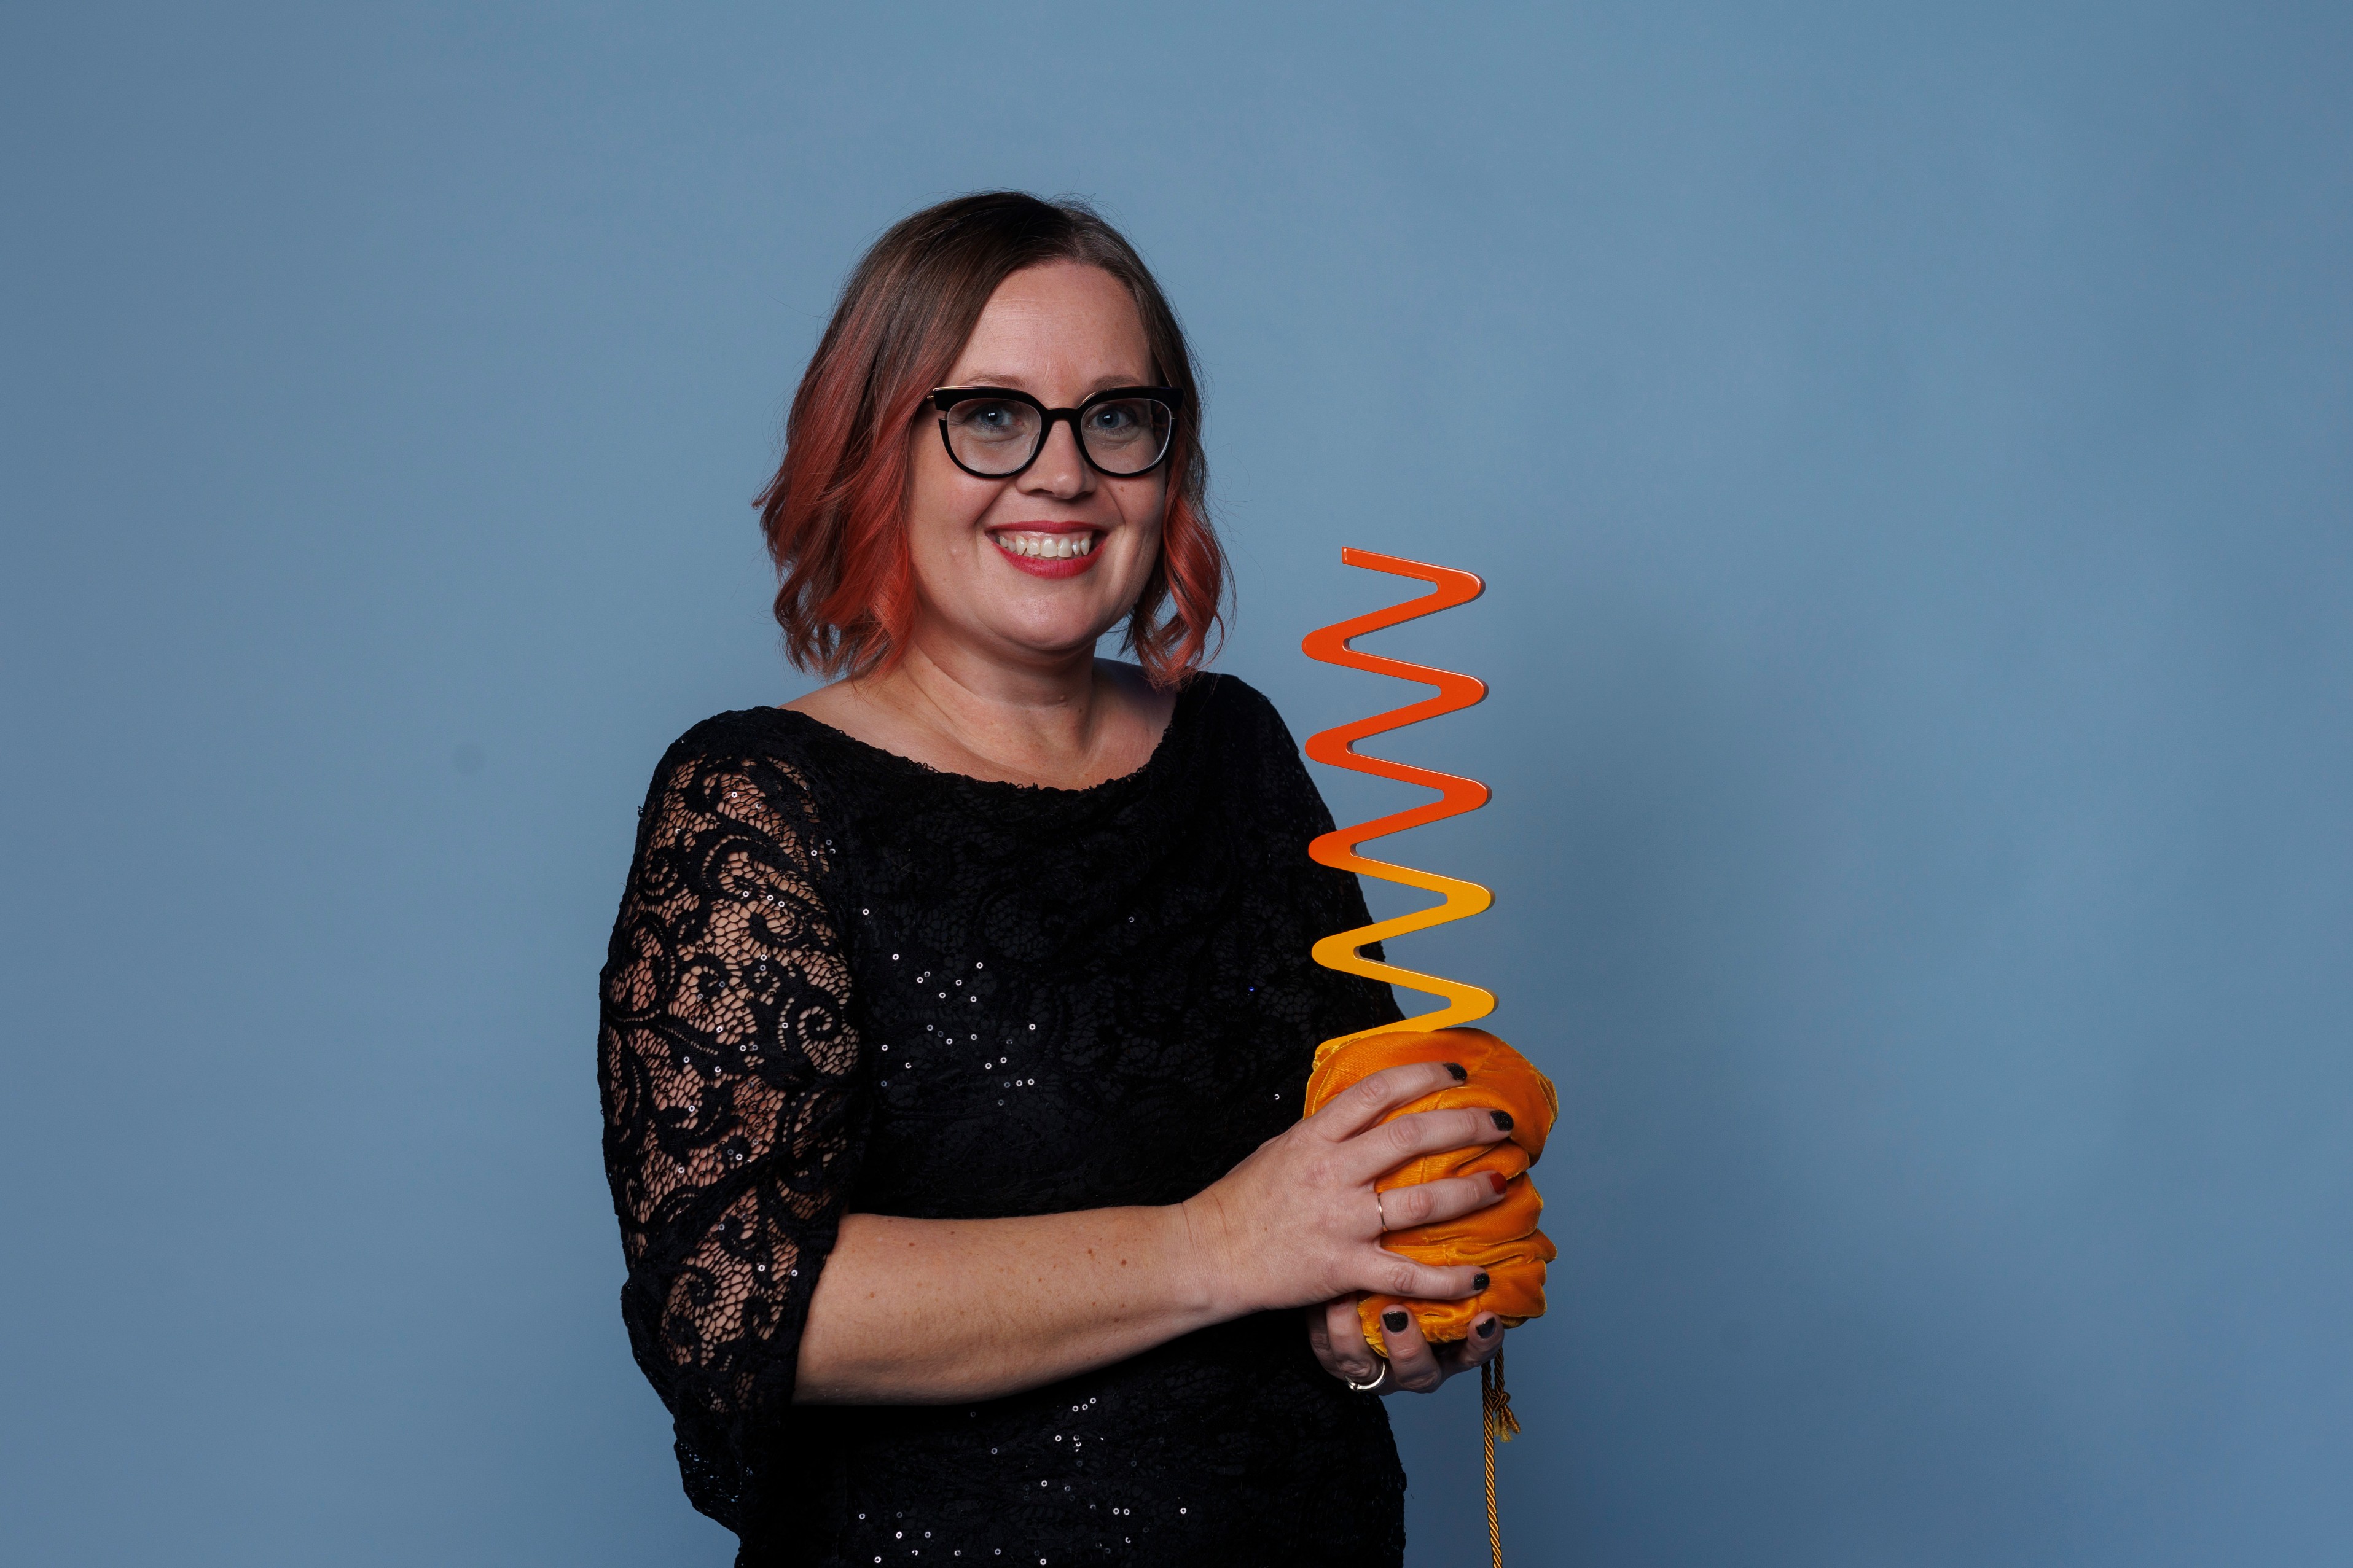 Michelle Grodecki, Arts and Learning recipient - Women black and red Ombre hair, black rimmed and black transparent lens glasses. She is wearing a black dress with lace sleeves and red lipstick smiling brightly while holding an orange wavelength award in a velvet orange pouch gathered at the base of the award.